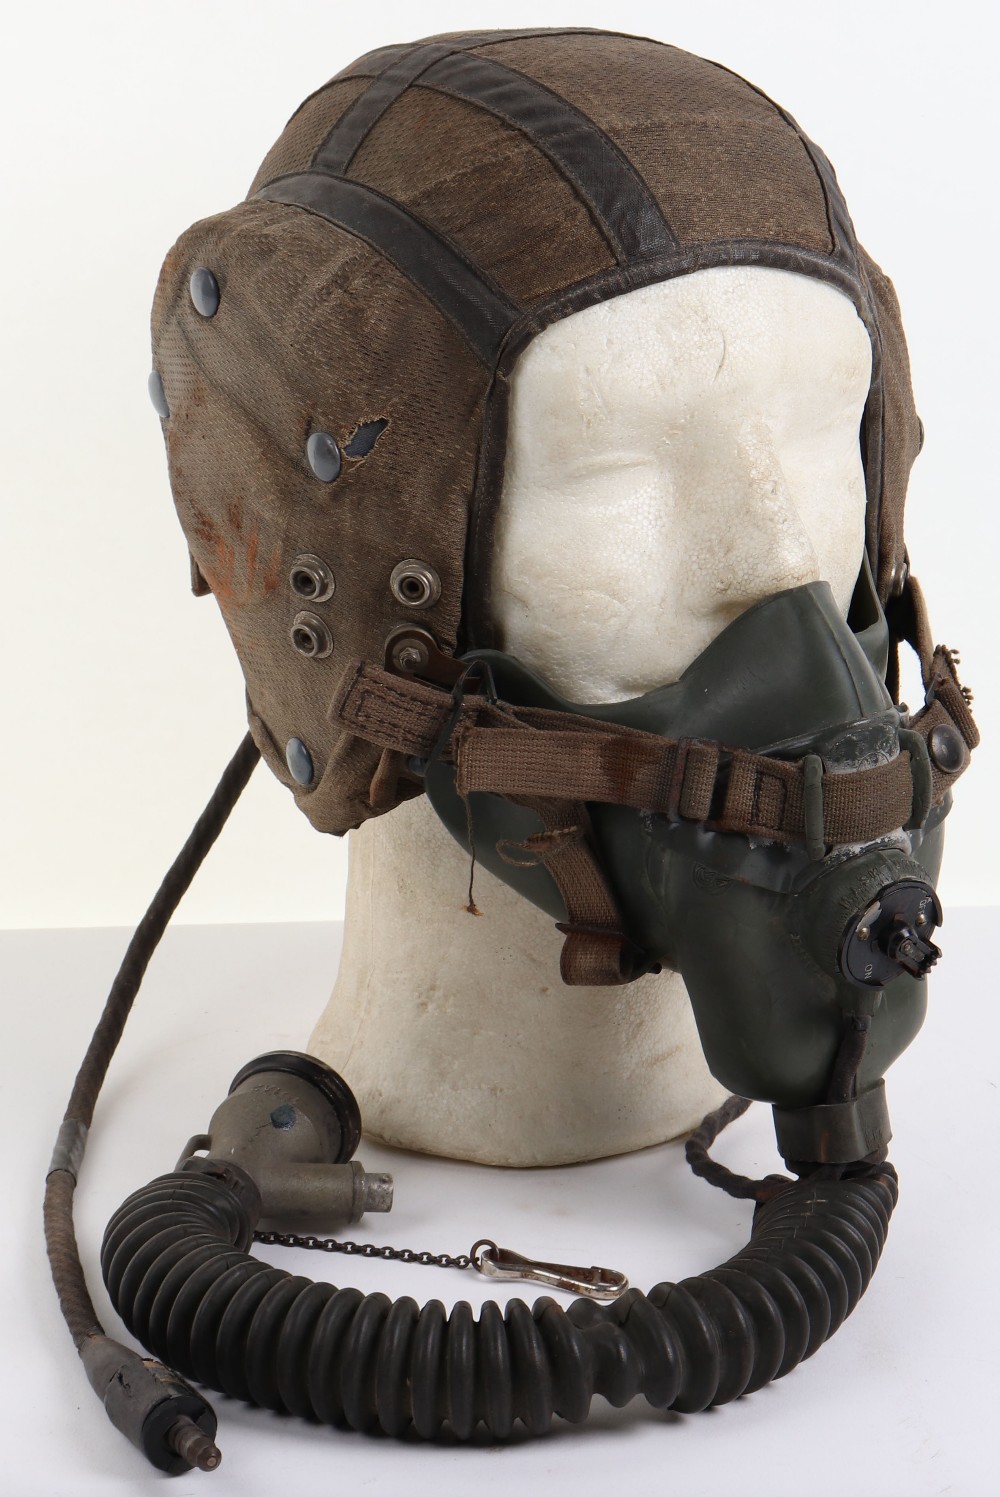 Post-WW2 Royal Air Force G-Type Flying Helmet and Oxygen Mask Set - Image 8 of 11